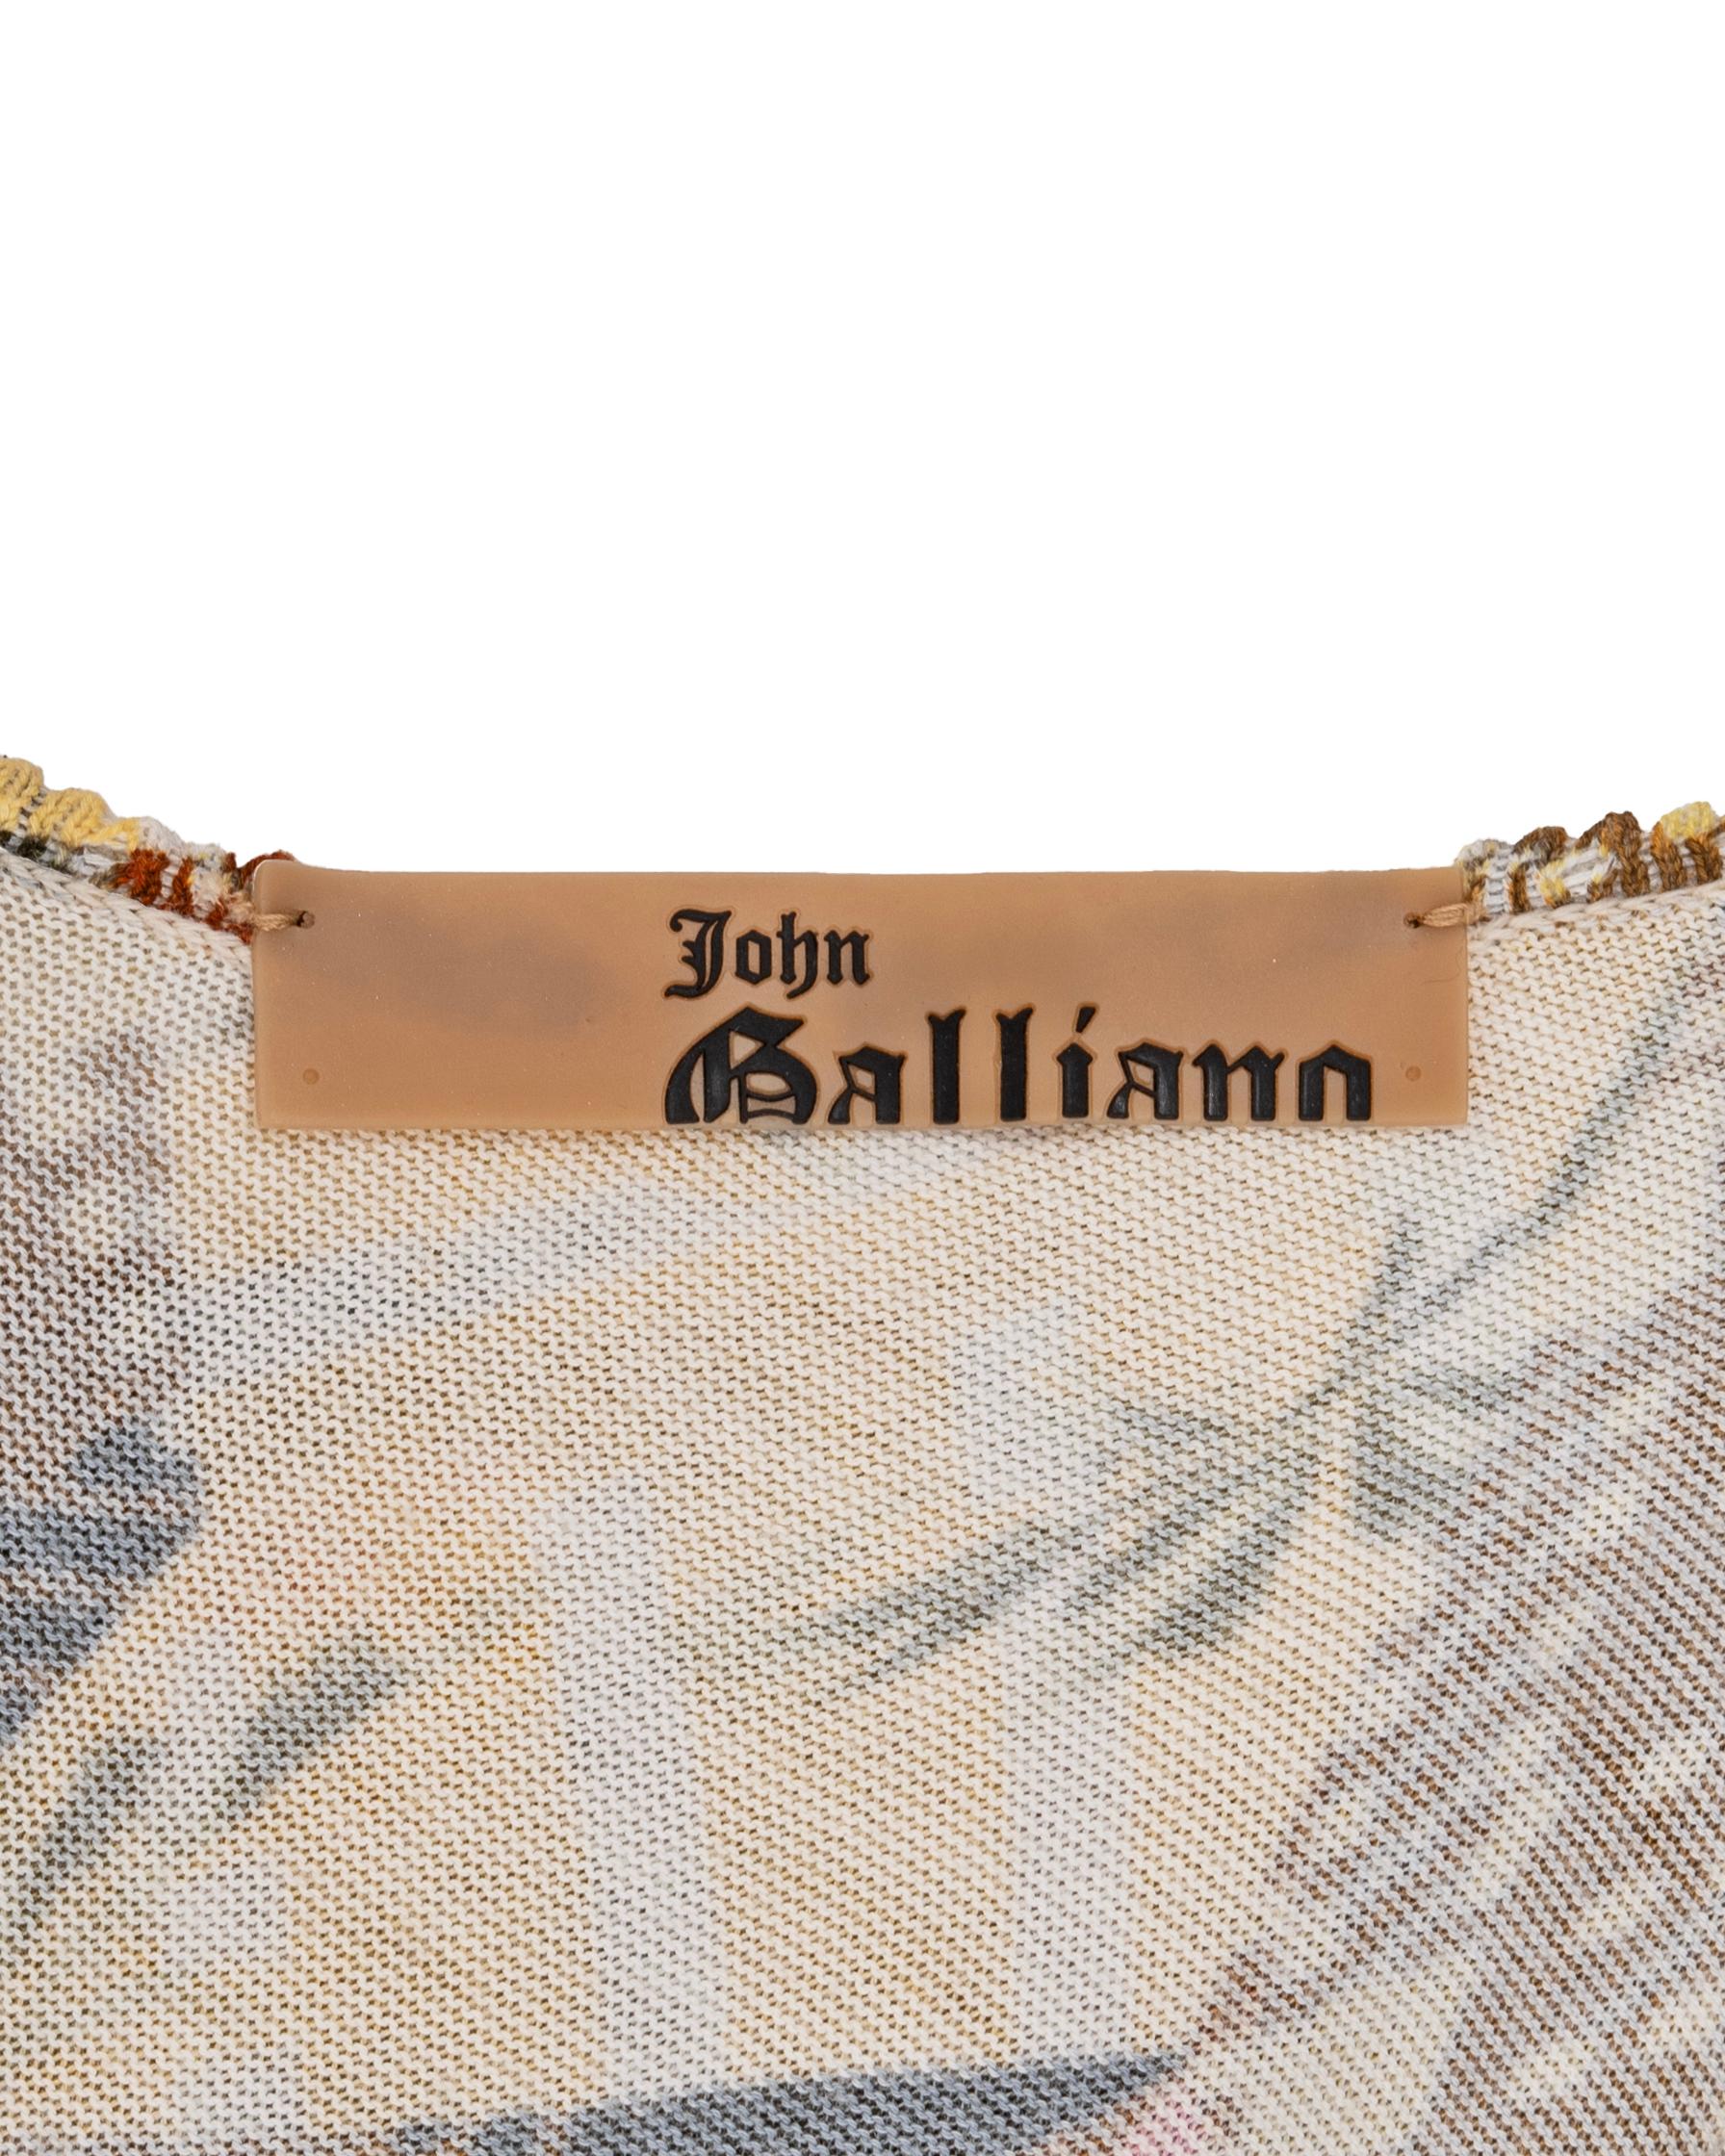 John Galliano knit jersey maxi dress with patchwork motif, fw 2004 For Sale 8